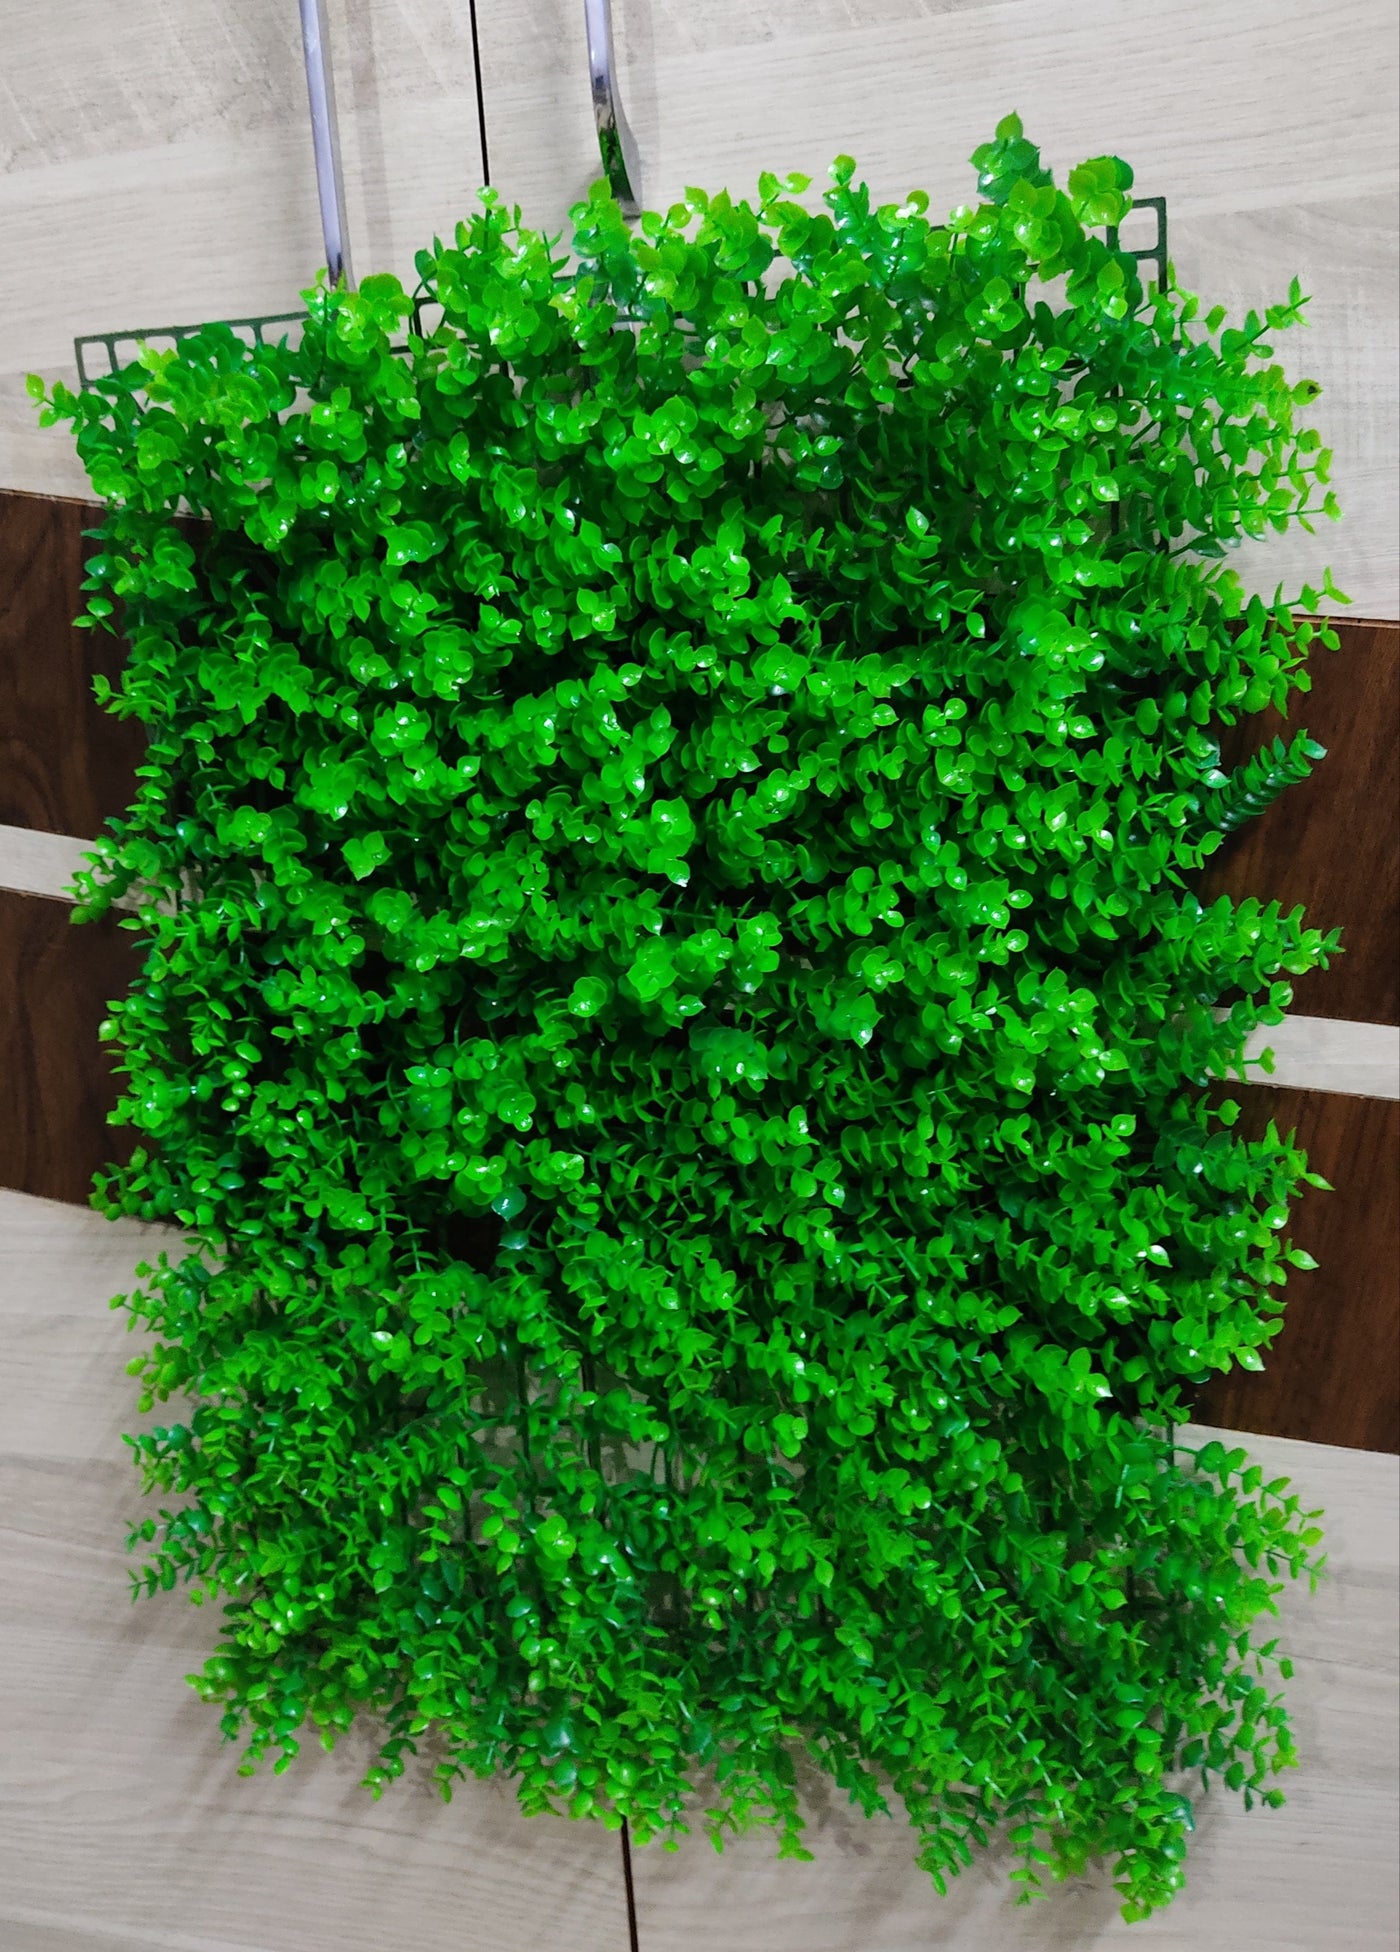 240 Rs for each Panel on buying 🏷IN BULK grass wall panels LAMANSH® ( 2×1.5 ft , size of each panel ) Artificial Eucalyptus Leaf Grass Wall Panels/Balconies & Outdoor Areas Wall Decoration / Indian Wedding & banquets decoration / backdrop ideas